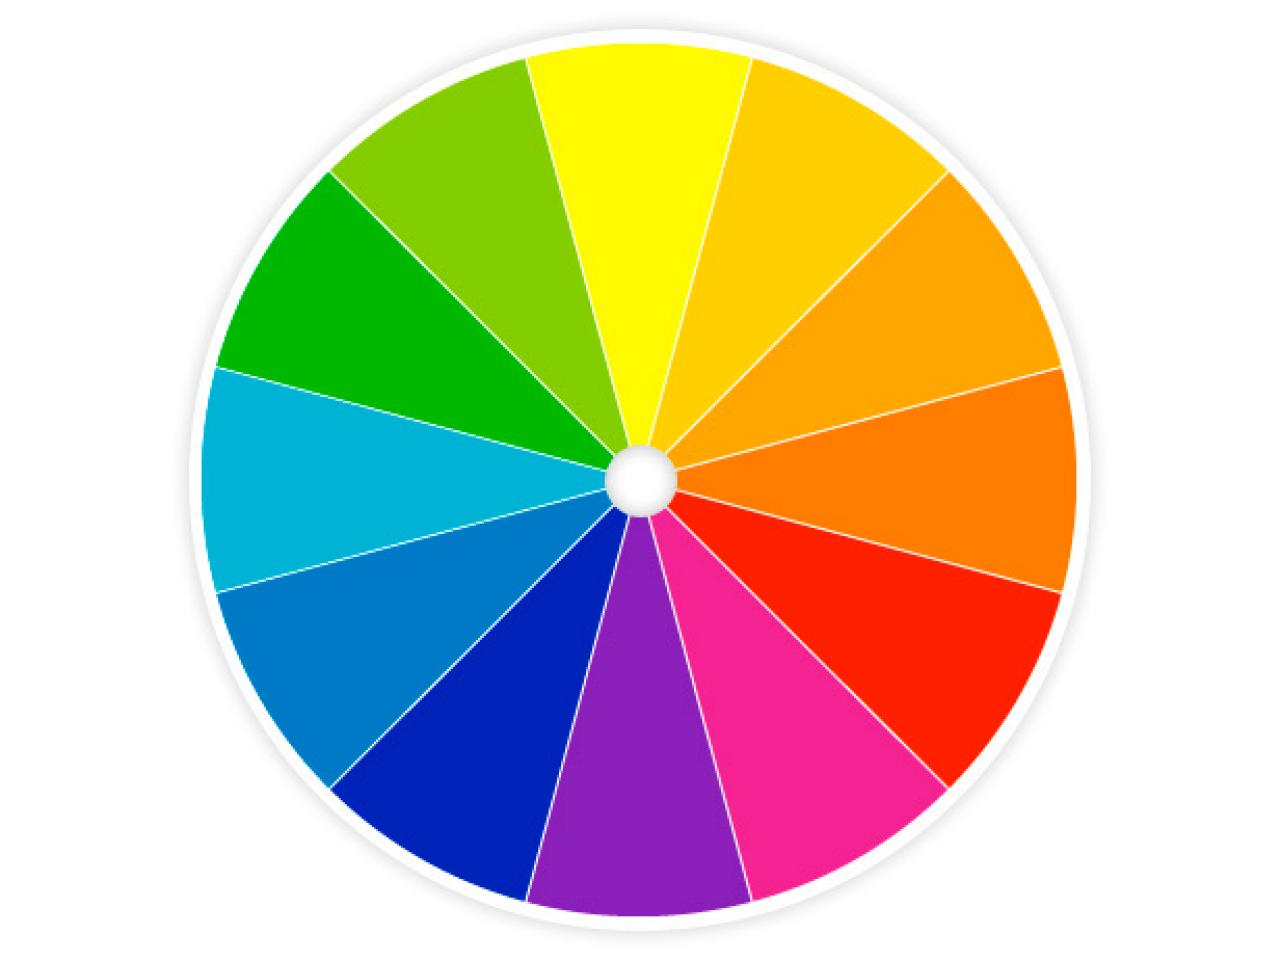 Blue is the opposite of orange on the color wheel 